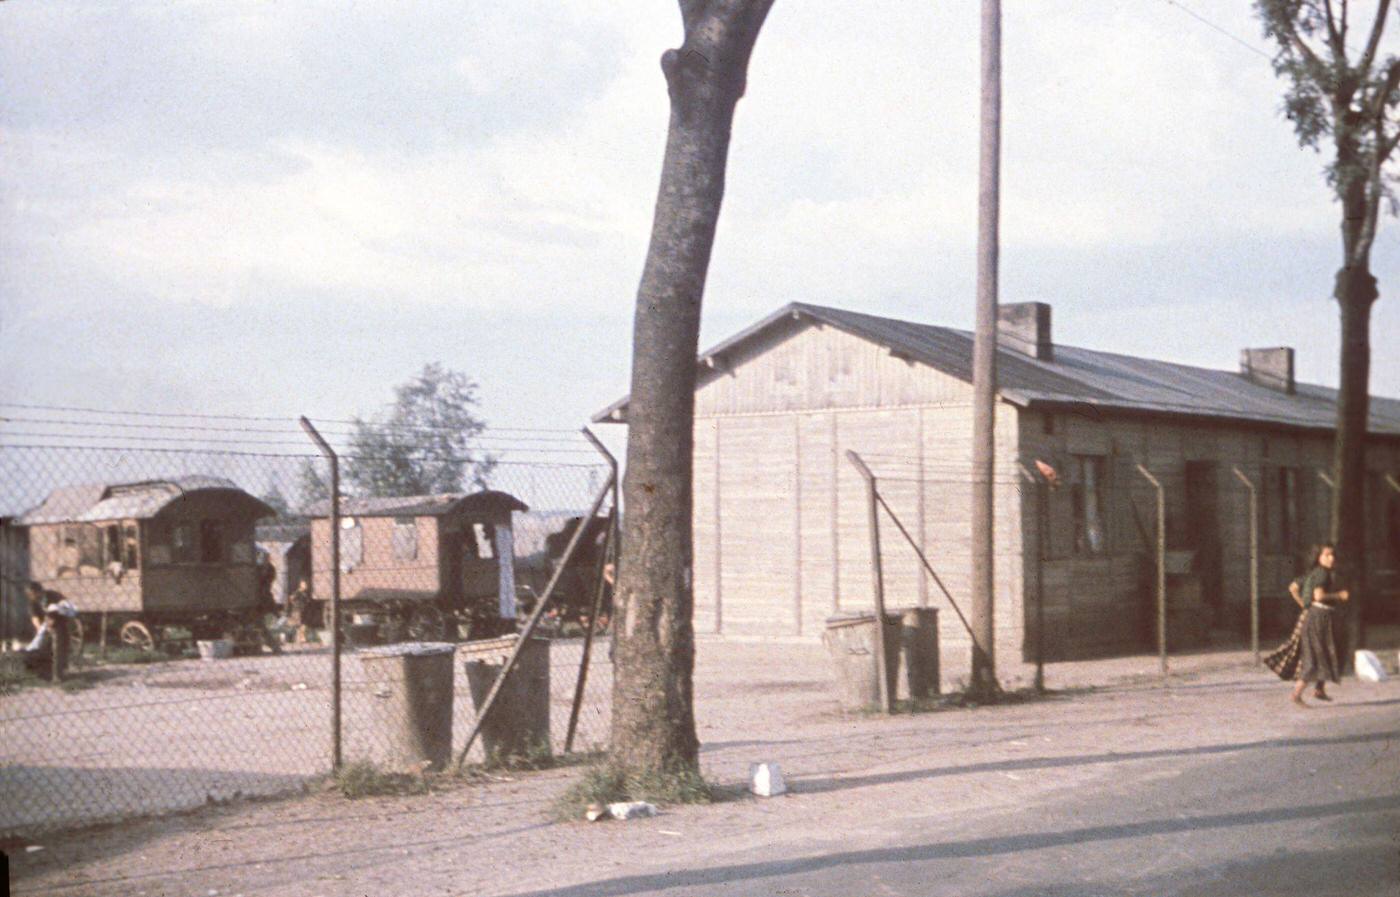 Sinti camp targeted by the Racial Hygiene Research Center, which provided the pseudo-scientific basis for the extermination and forced sterilization of thousands of Sinti and Roma in 1940.